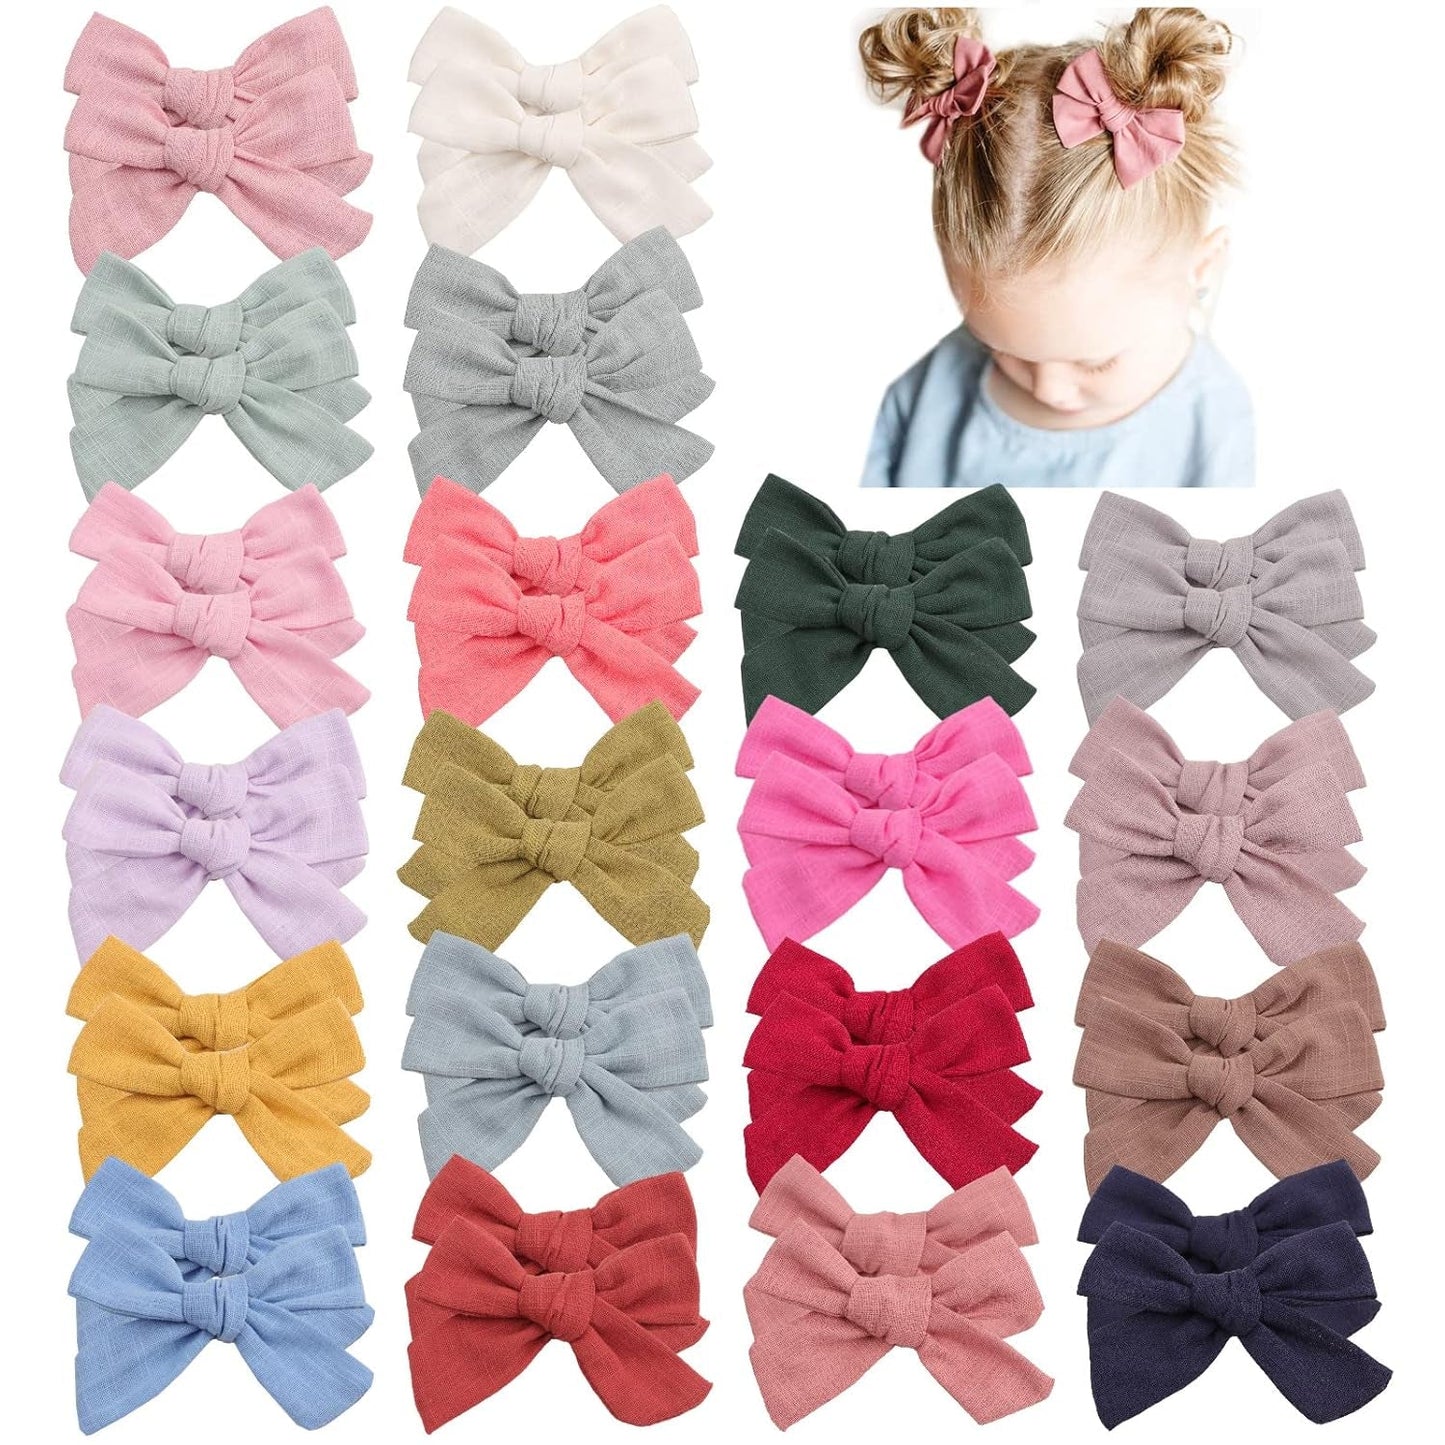 40Pcs 3.5Inch Hair Bows for Toddler Girls, Oaoleer Velvet Bows Neutral Pigtail Bows Alligator Clips Hair Barrettes Accessories for Baby Little Girls Kids in Pairs (Velvet Bows)